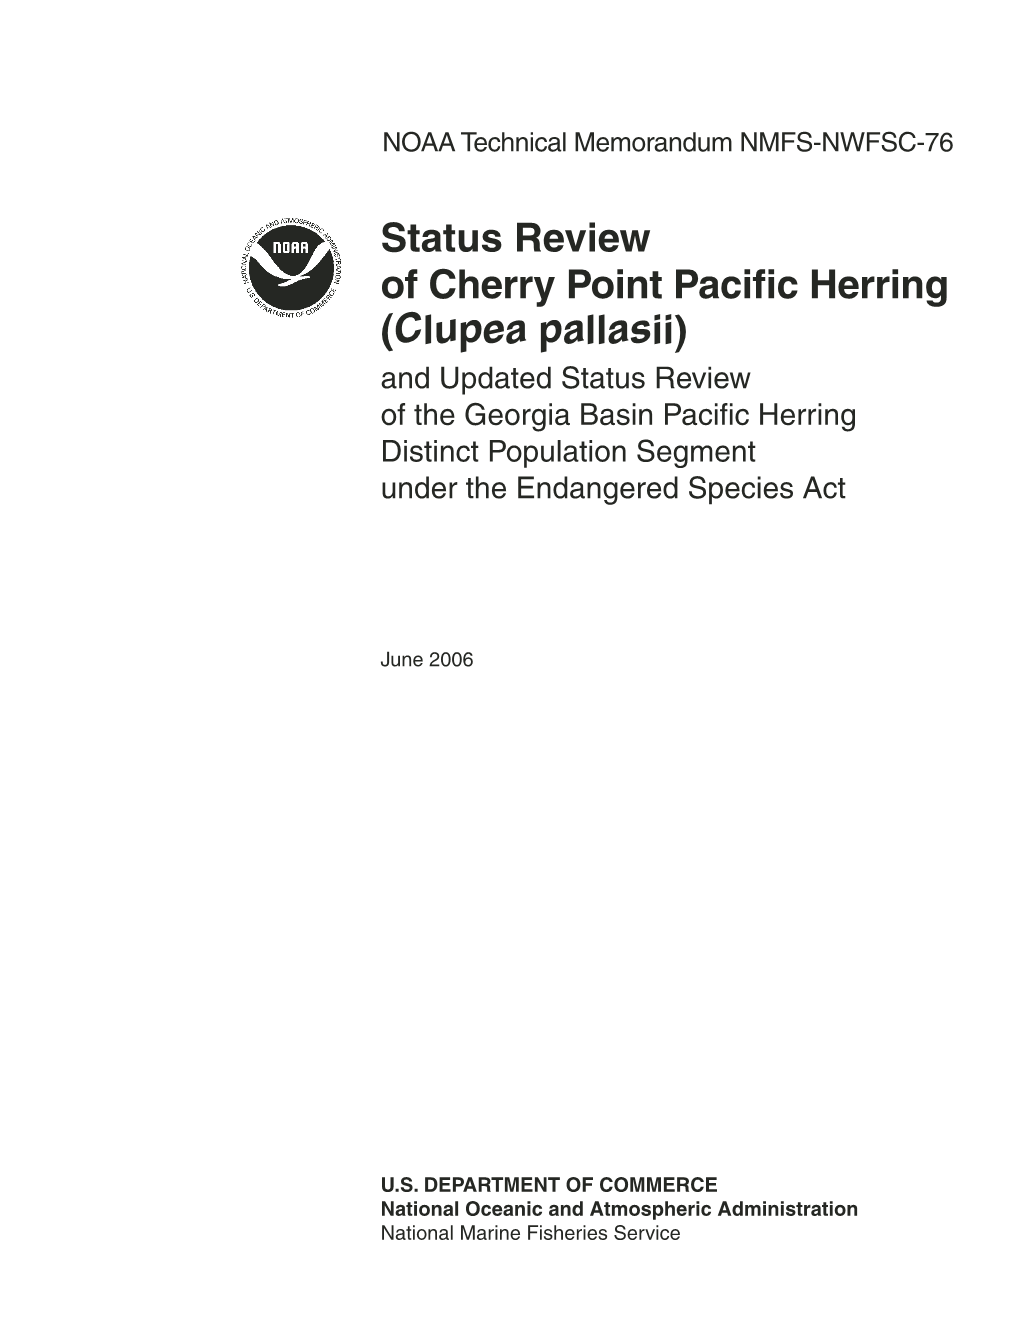 Status Review of Cherry Point Pacific Herring